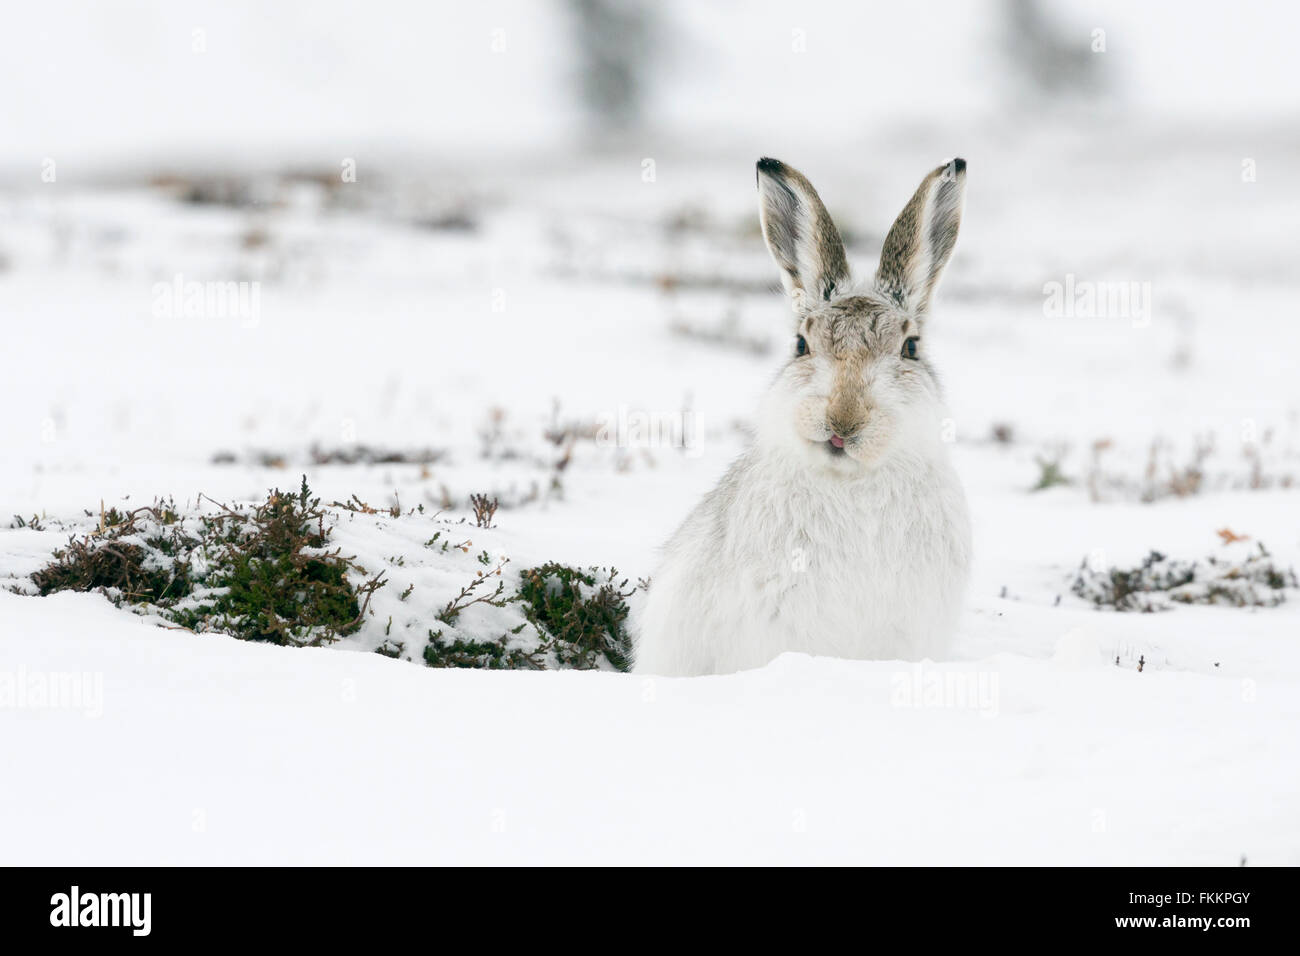 Mountain hare in snow, Findhorn Valley, Inverness-Shire, Scotland, March 2016. Stock Photo